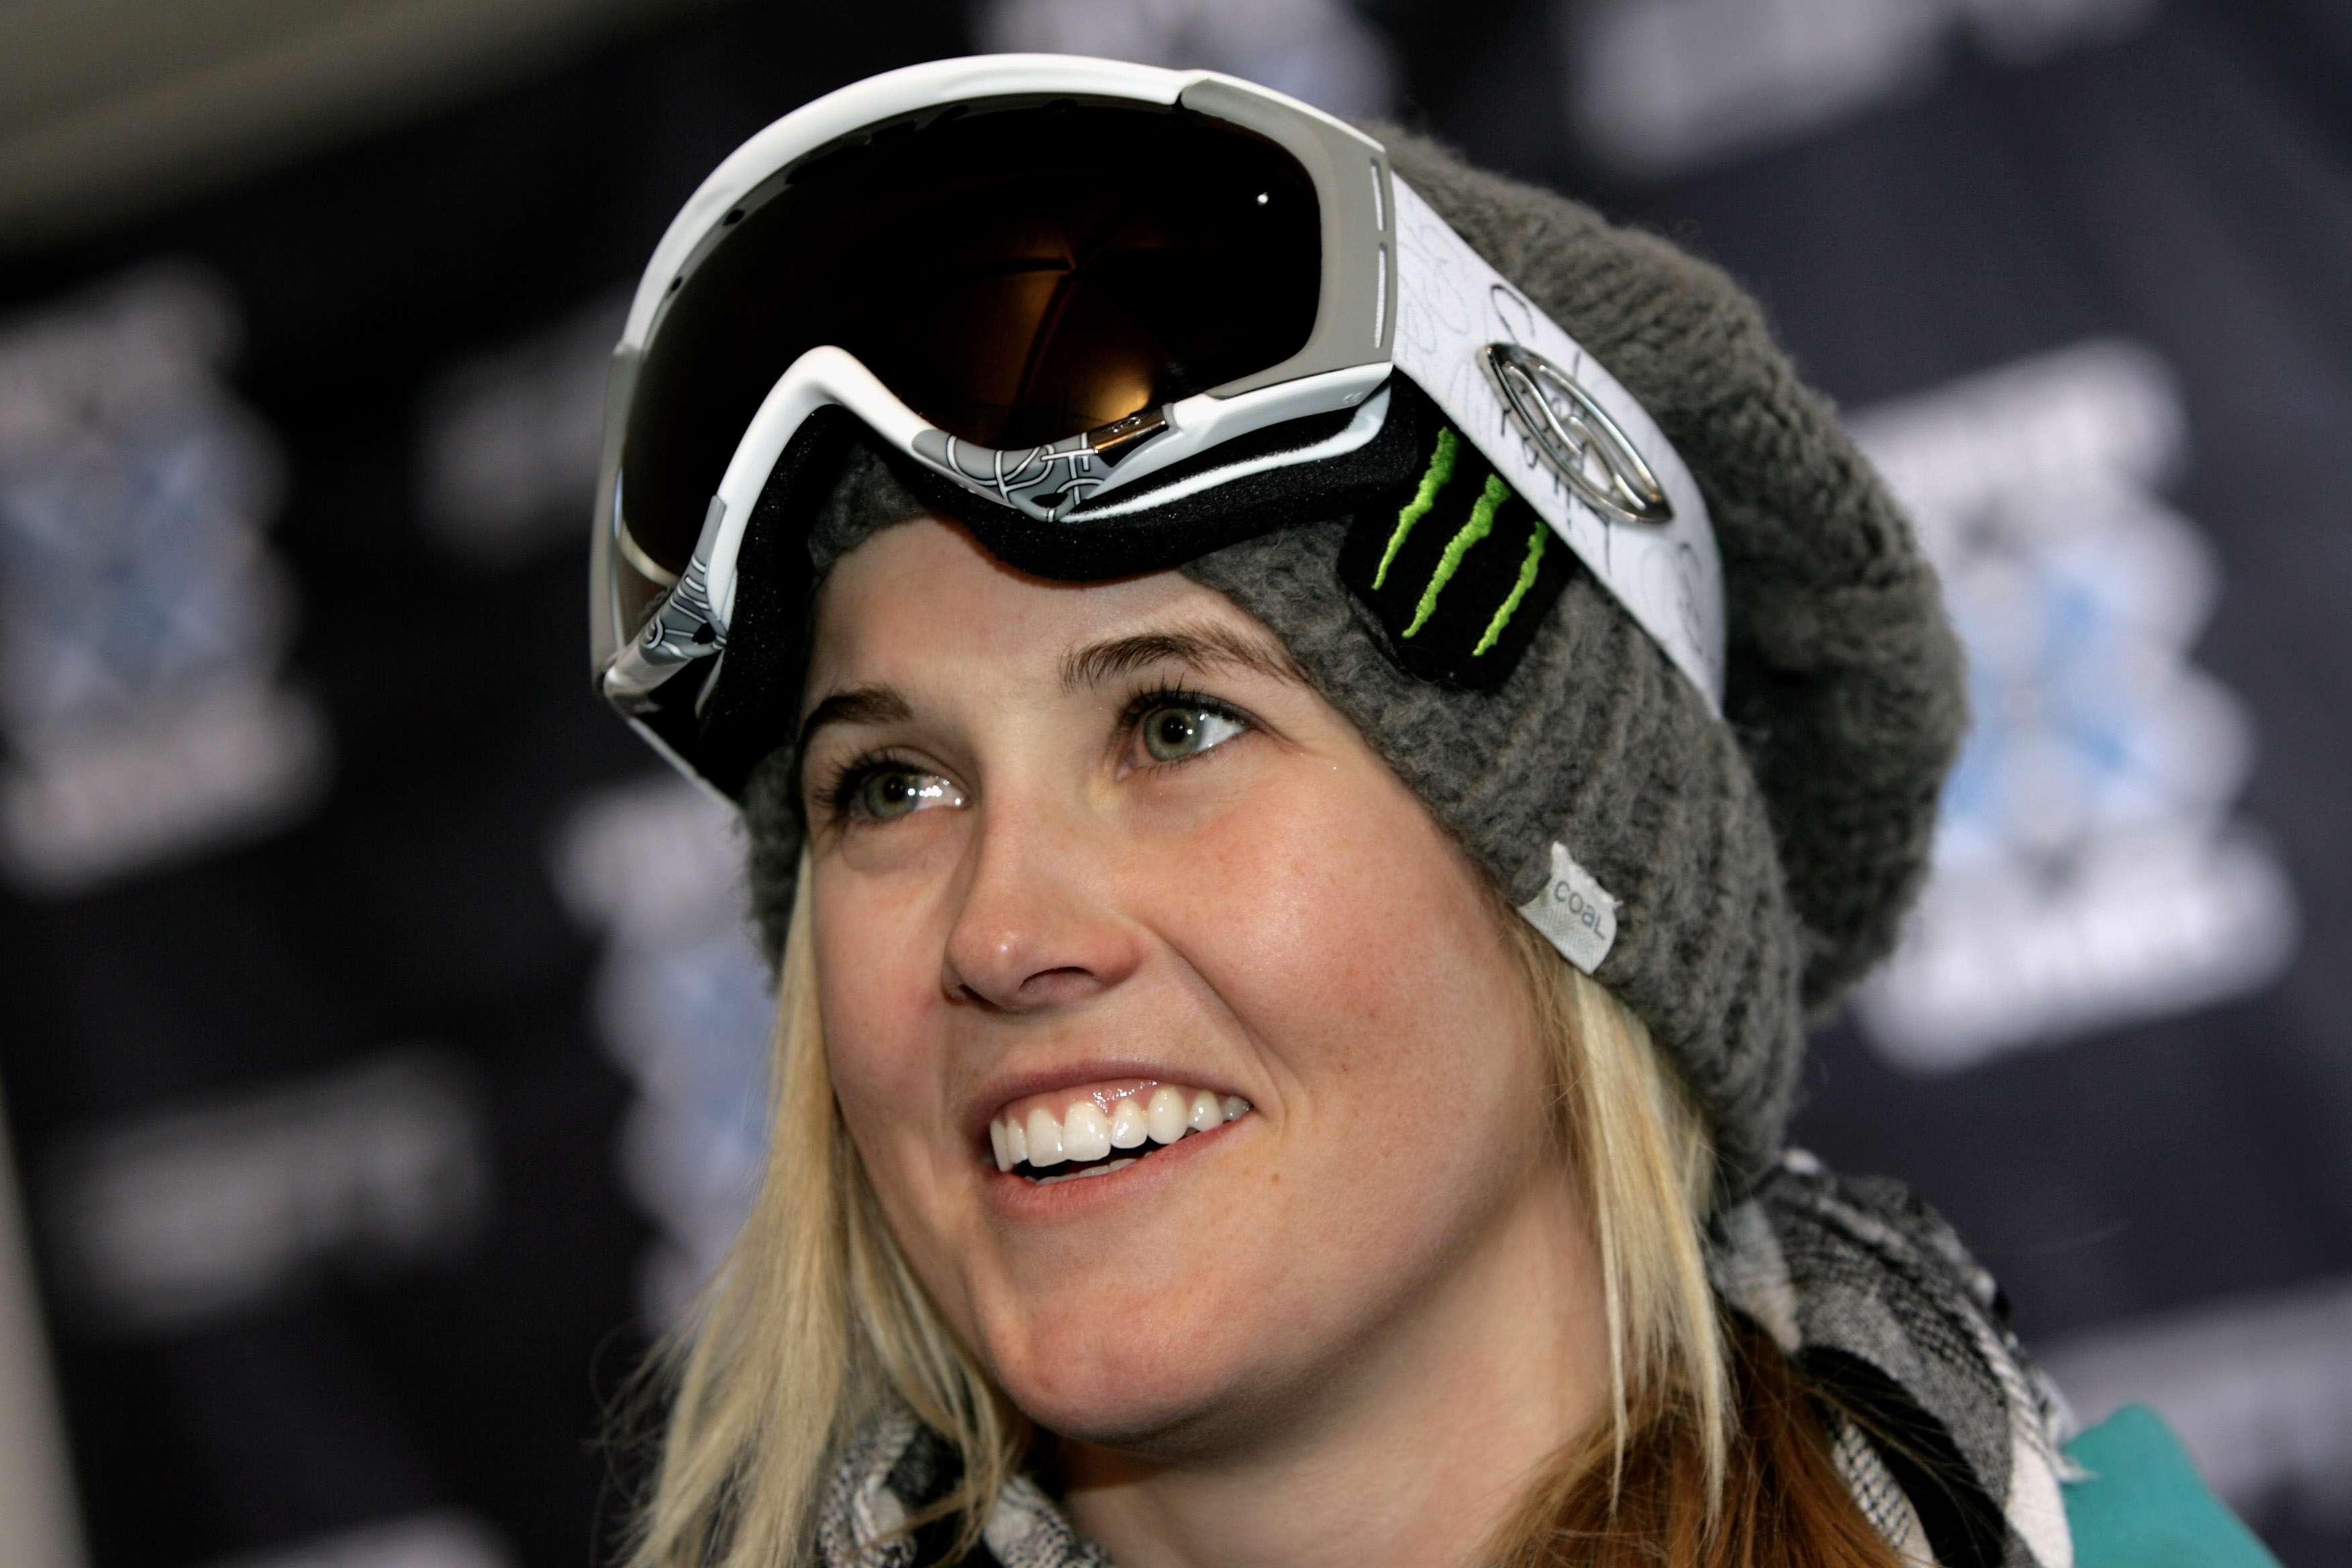 ASPEN, CO - JANUARY 21:  Skier Sarah Burke of Canada talks to the media on the eve of Winter X Games 13 on Buttermilk Mountain on January 21, 2008 in Aspen, Colorado.  (Photo by Doug Pensinger/Getty Images)